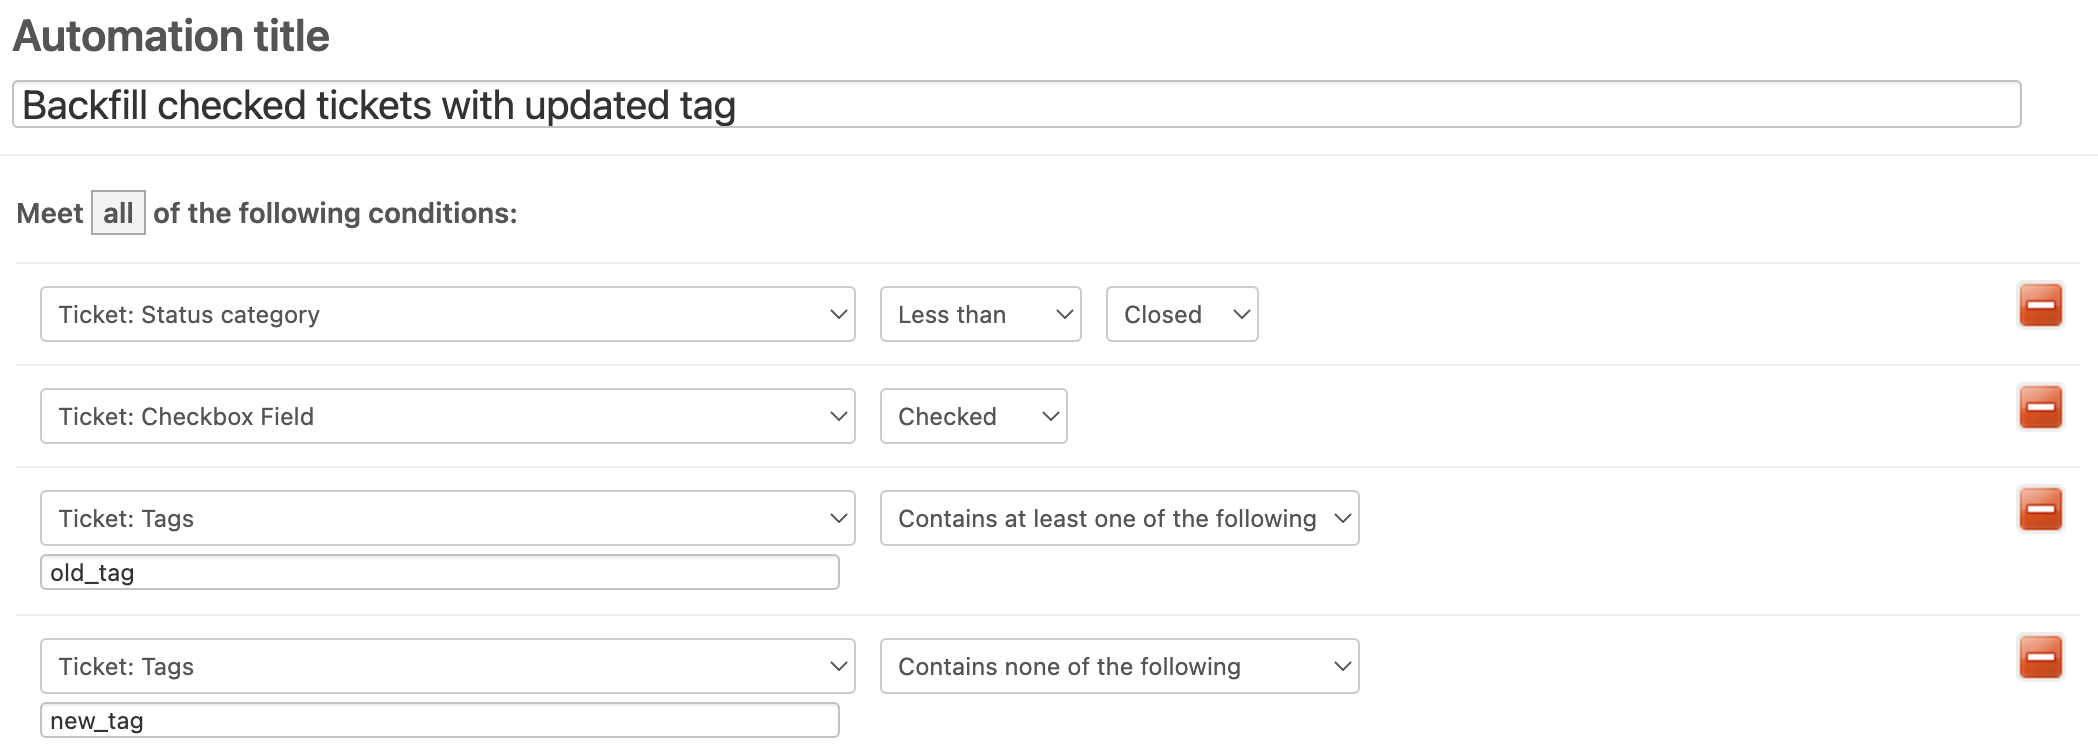 Backfill checked tickets with updated tag automation